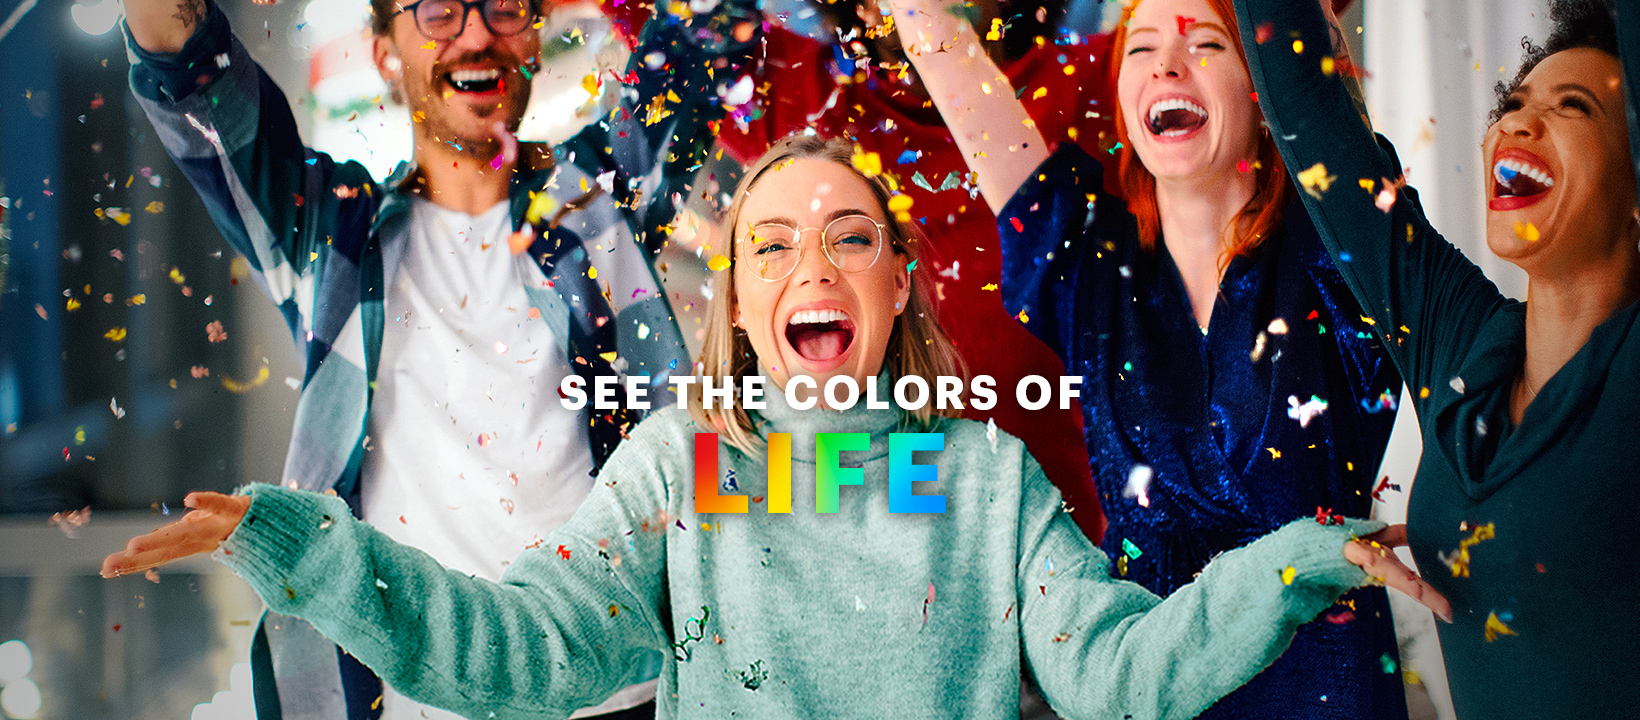 SEE THE COLORS OF LIFE